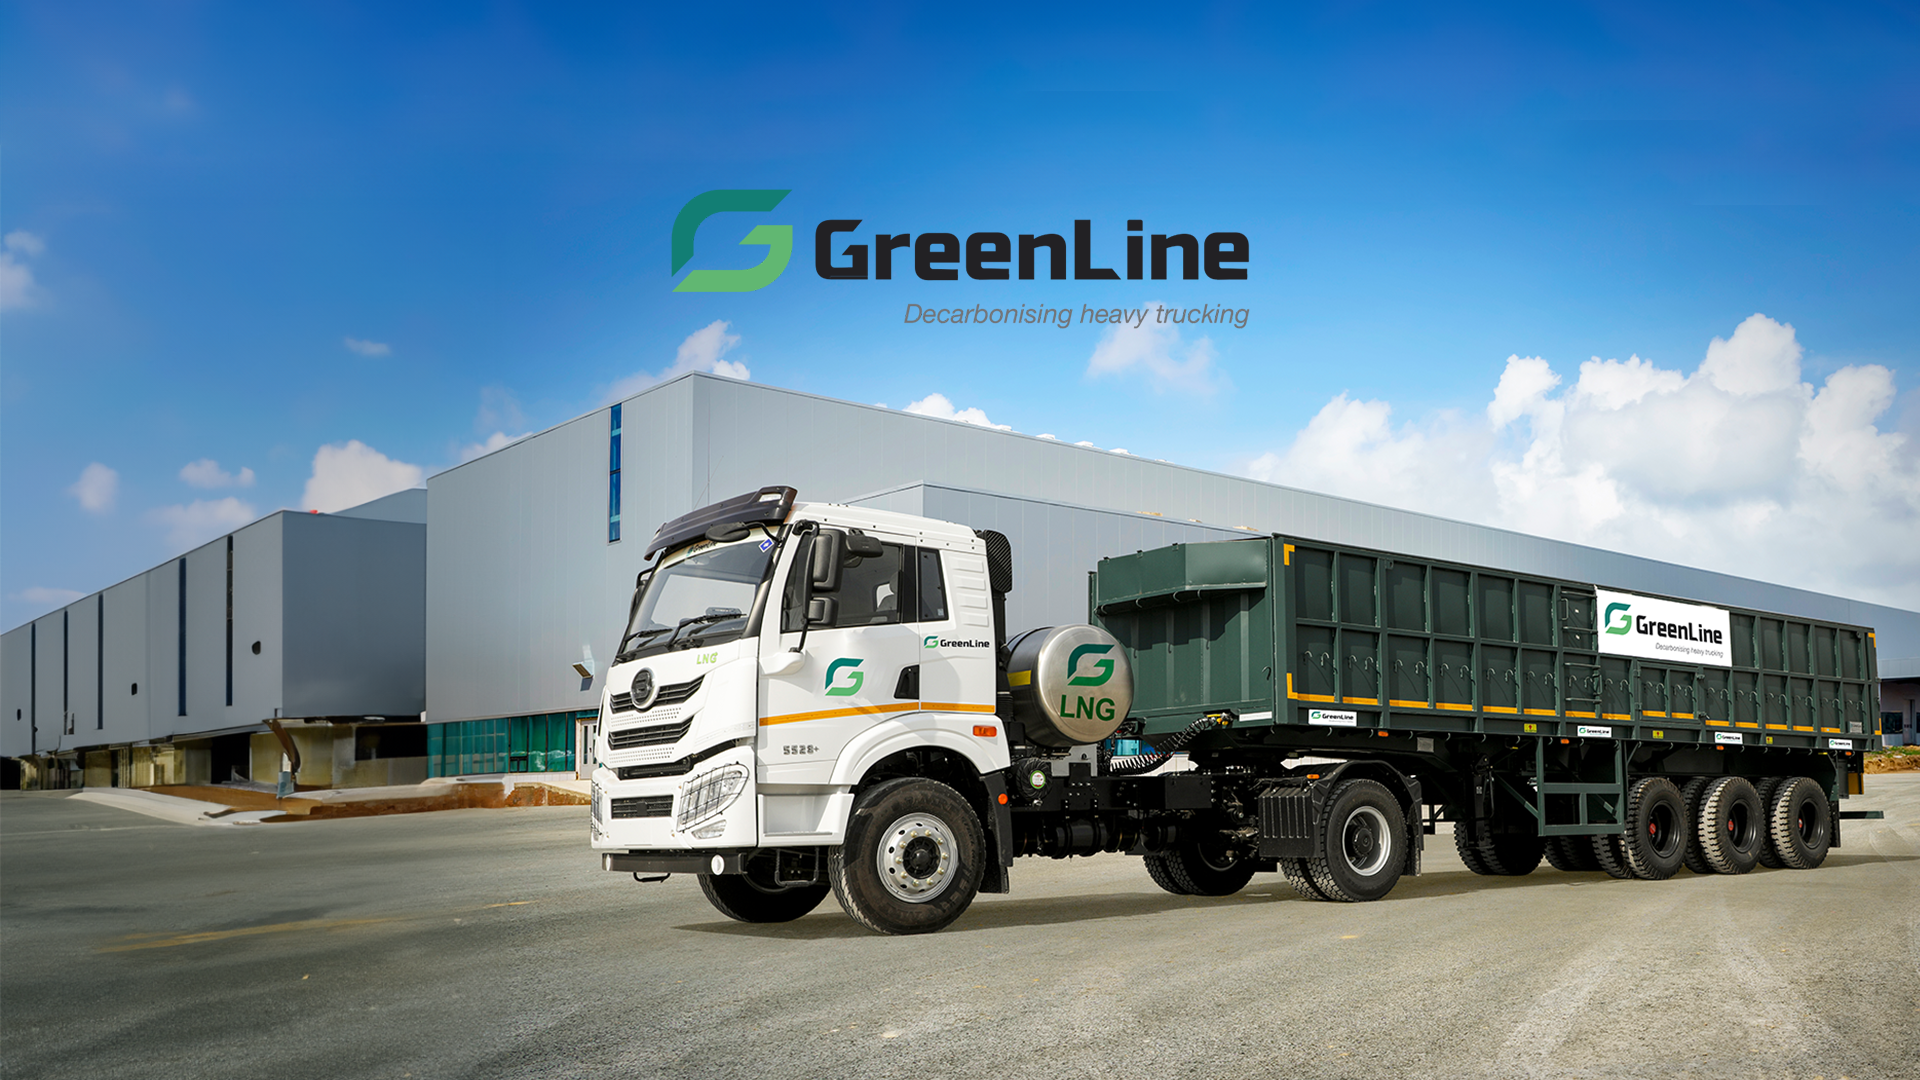 GreenLine’s 5,000 crore investment to deploy 5000 more LNG trucks